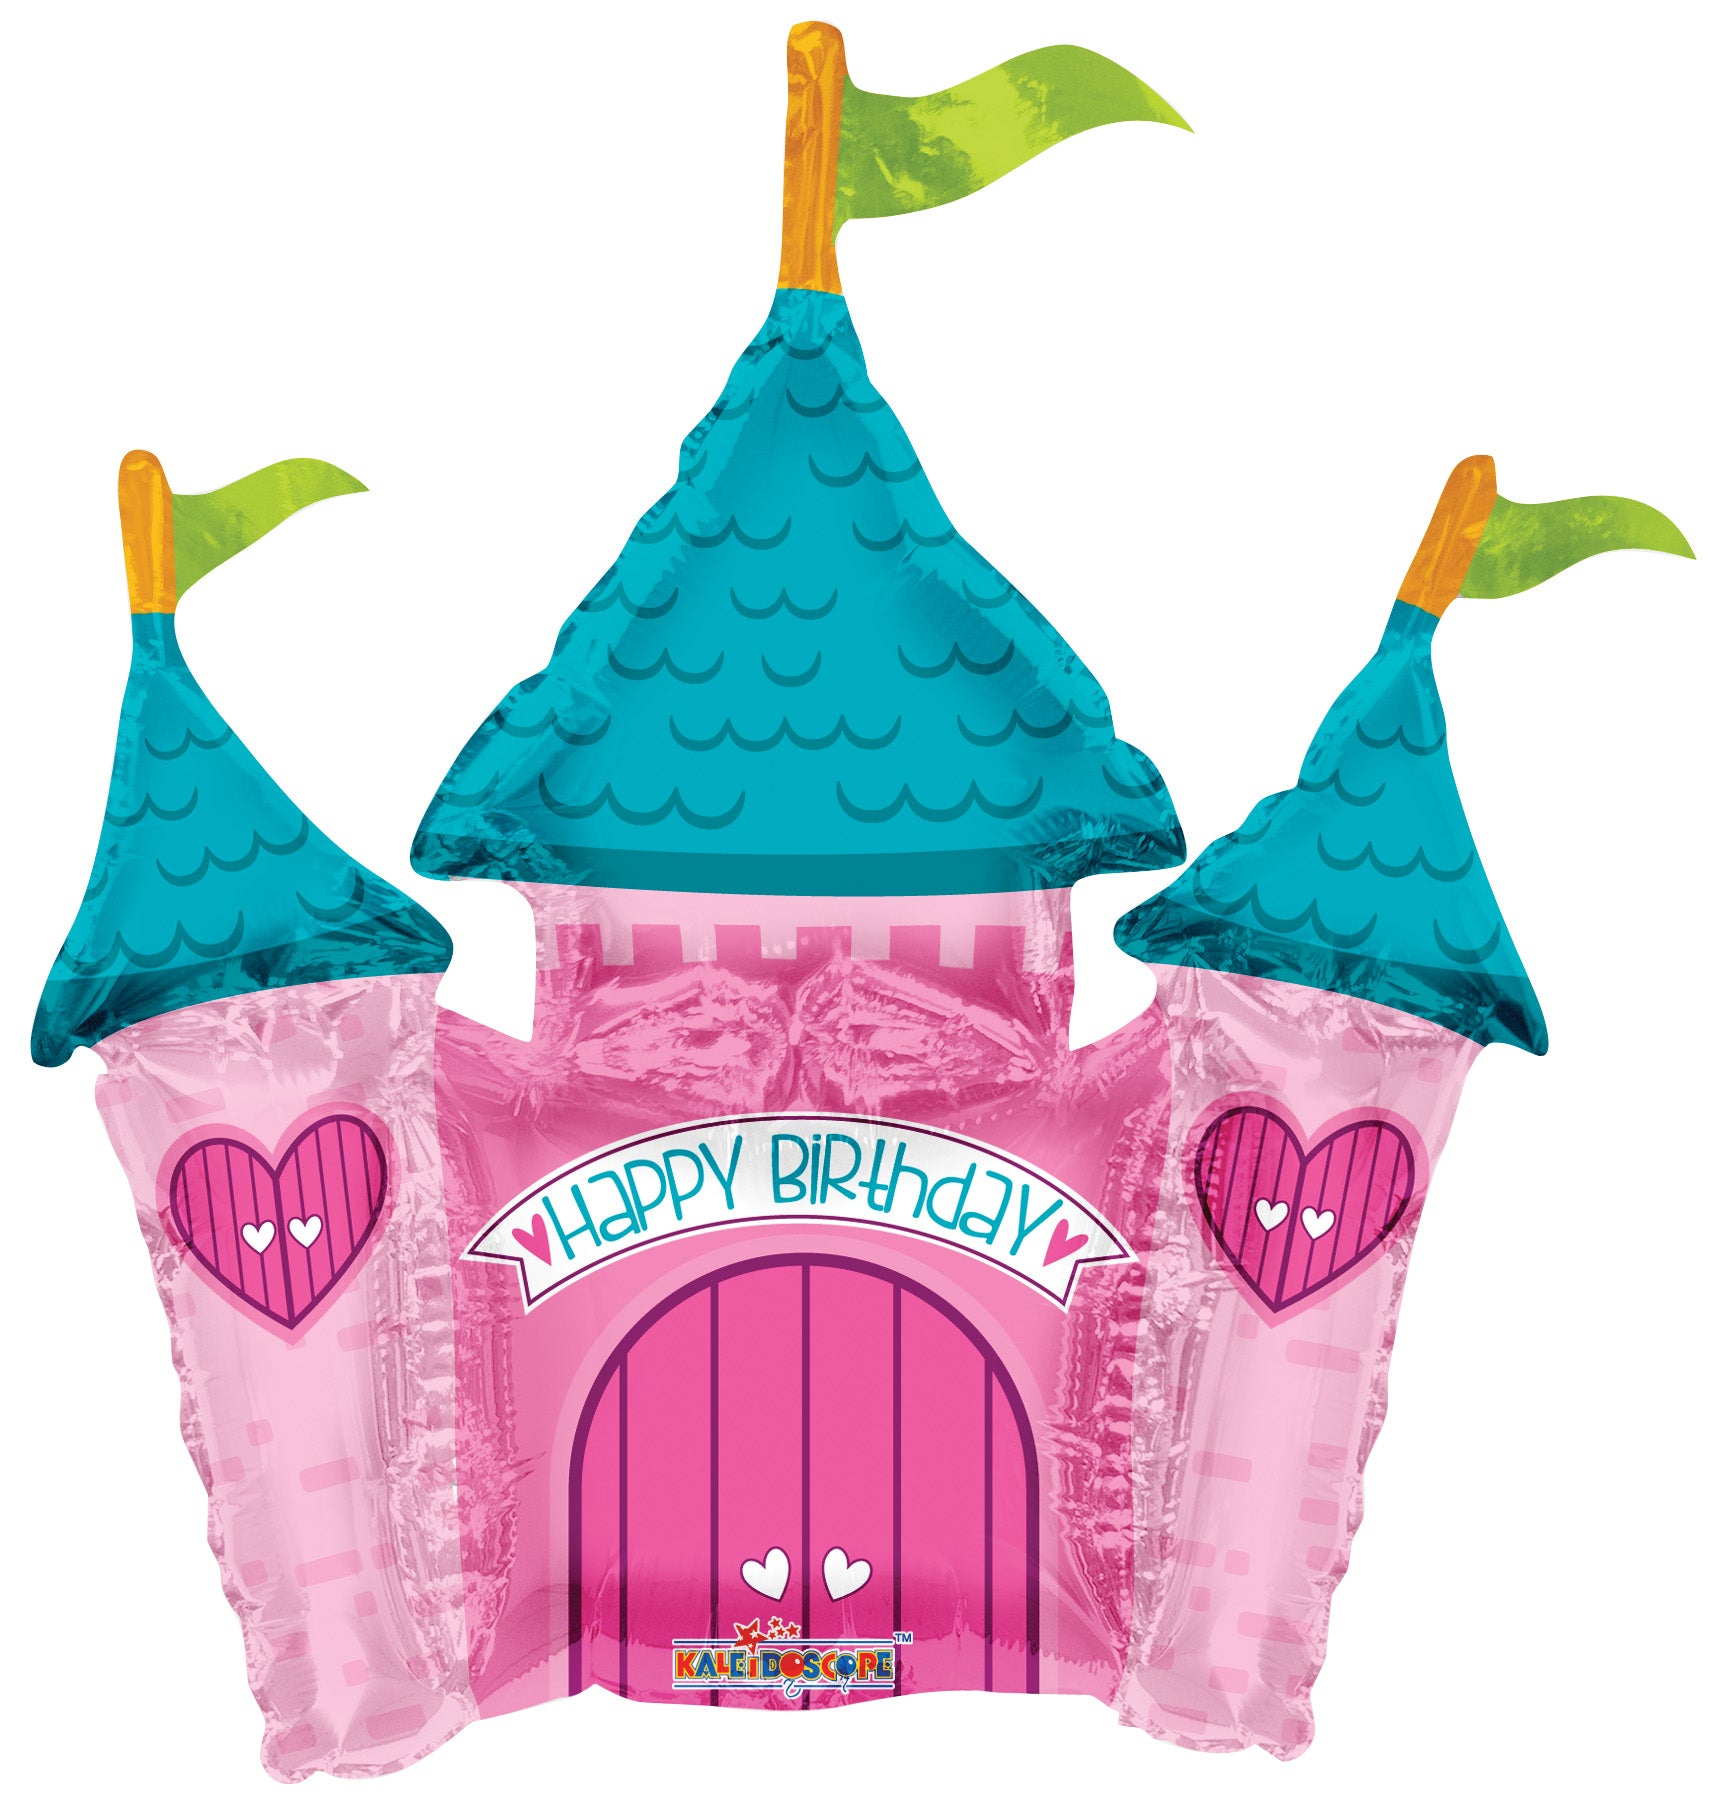 14" Princess Castle Birthday Foil Airfill Balloon | Buy 5 Or More Save 20%